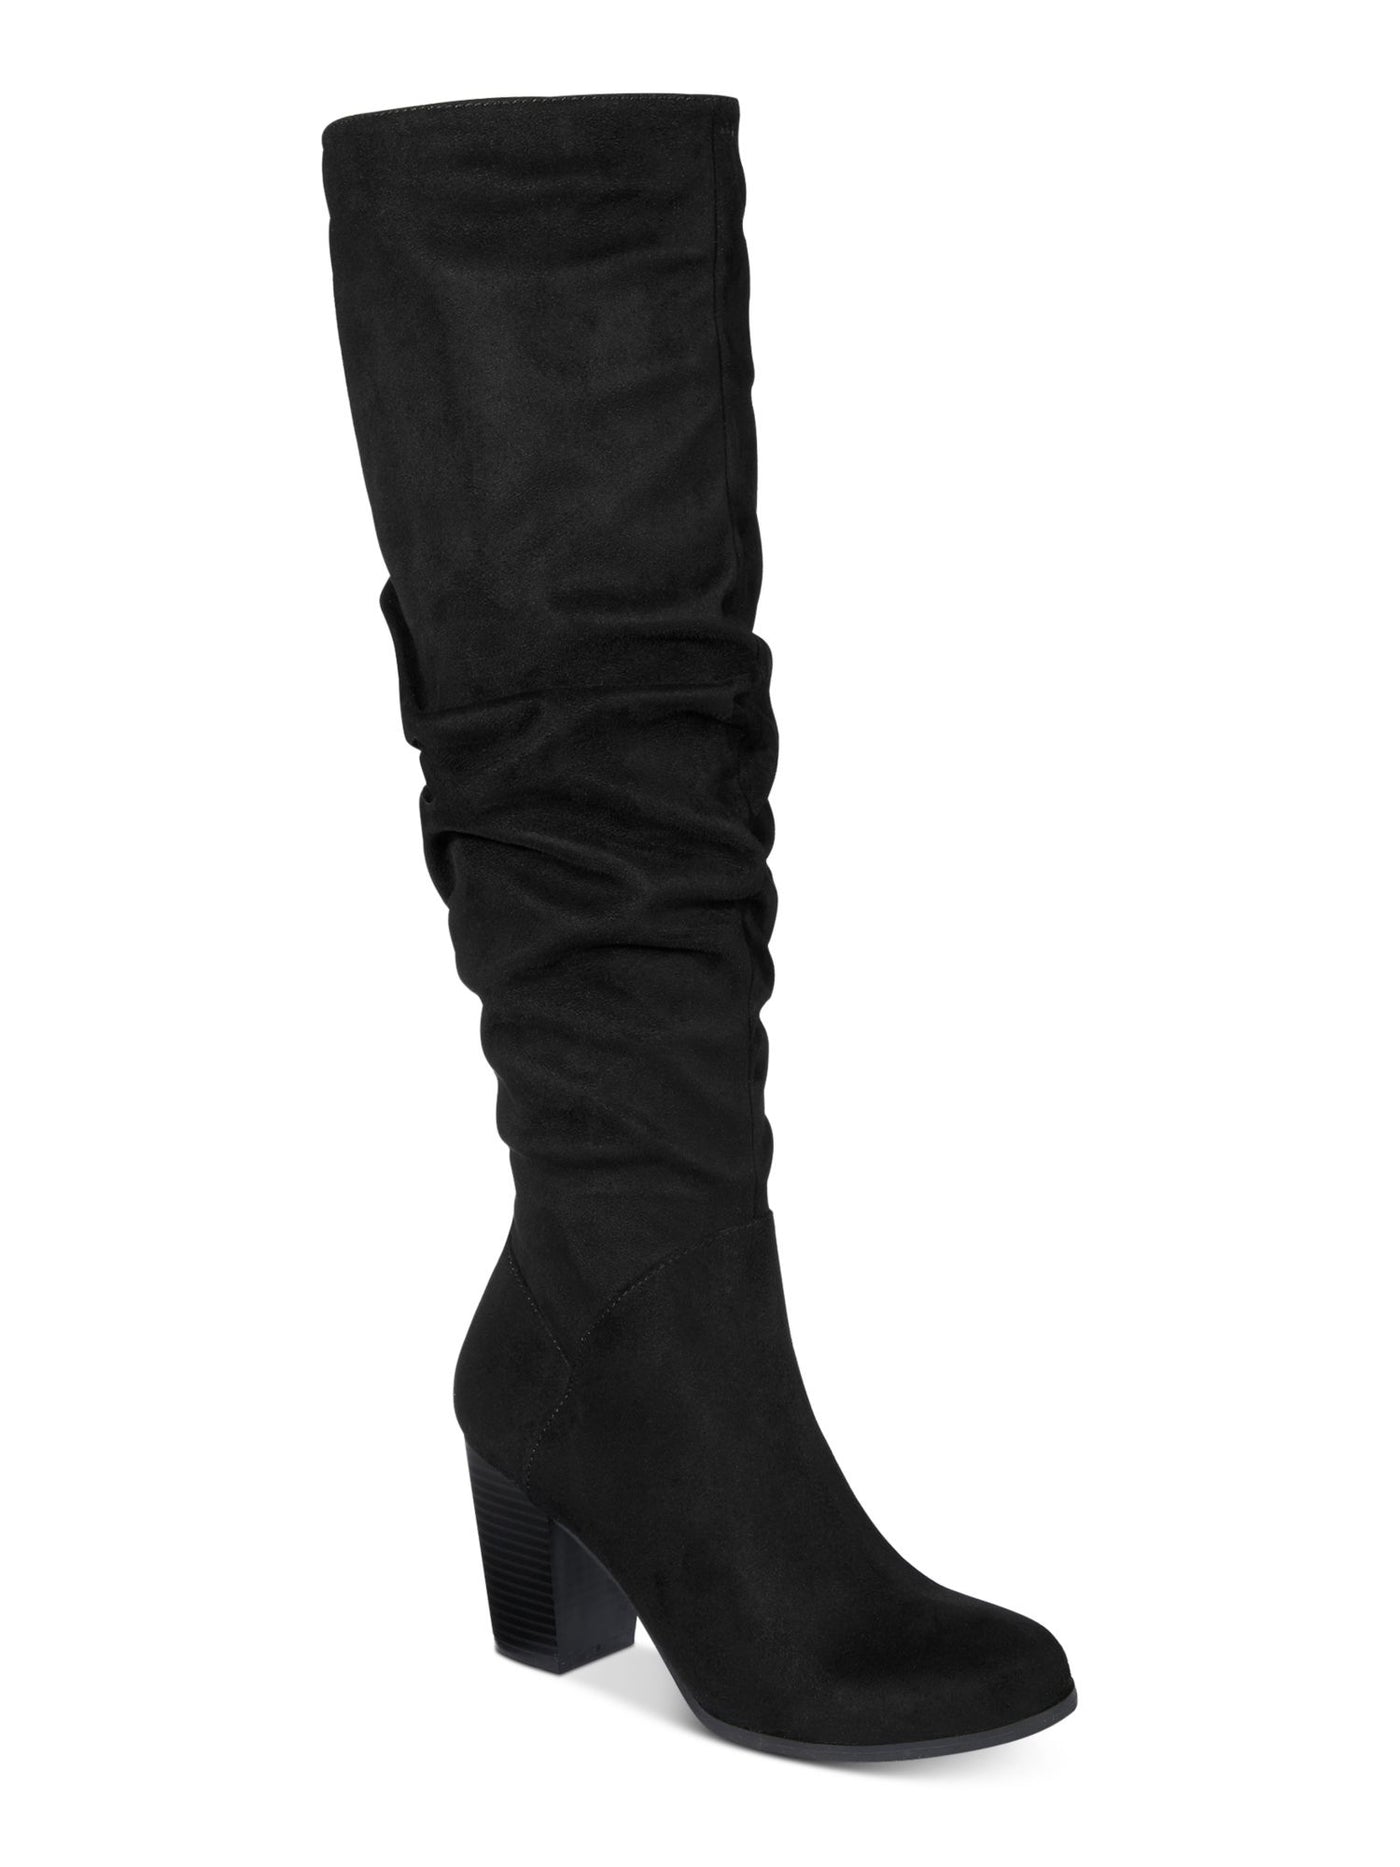 MATERIAL GIRL Womens Black V-Notch Detail Cushioned Comfort Zipper Accent Ruched Myah Round Toe Dress Boots Shoes 9 M